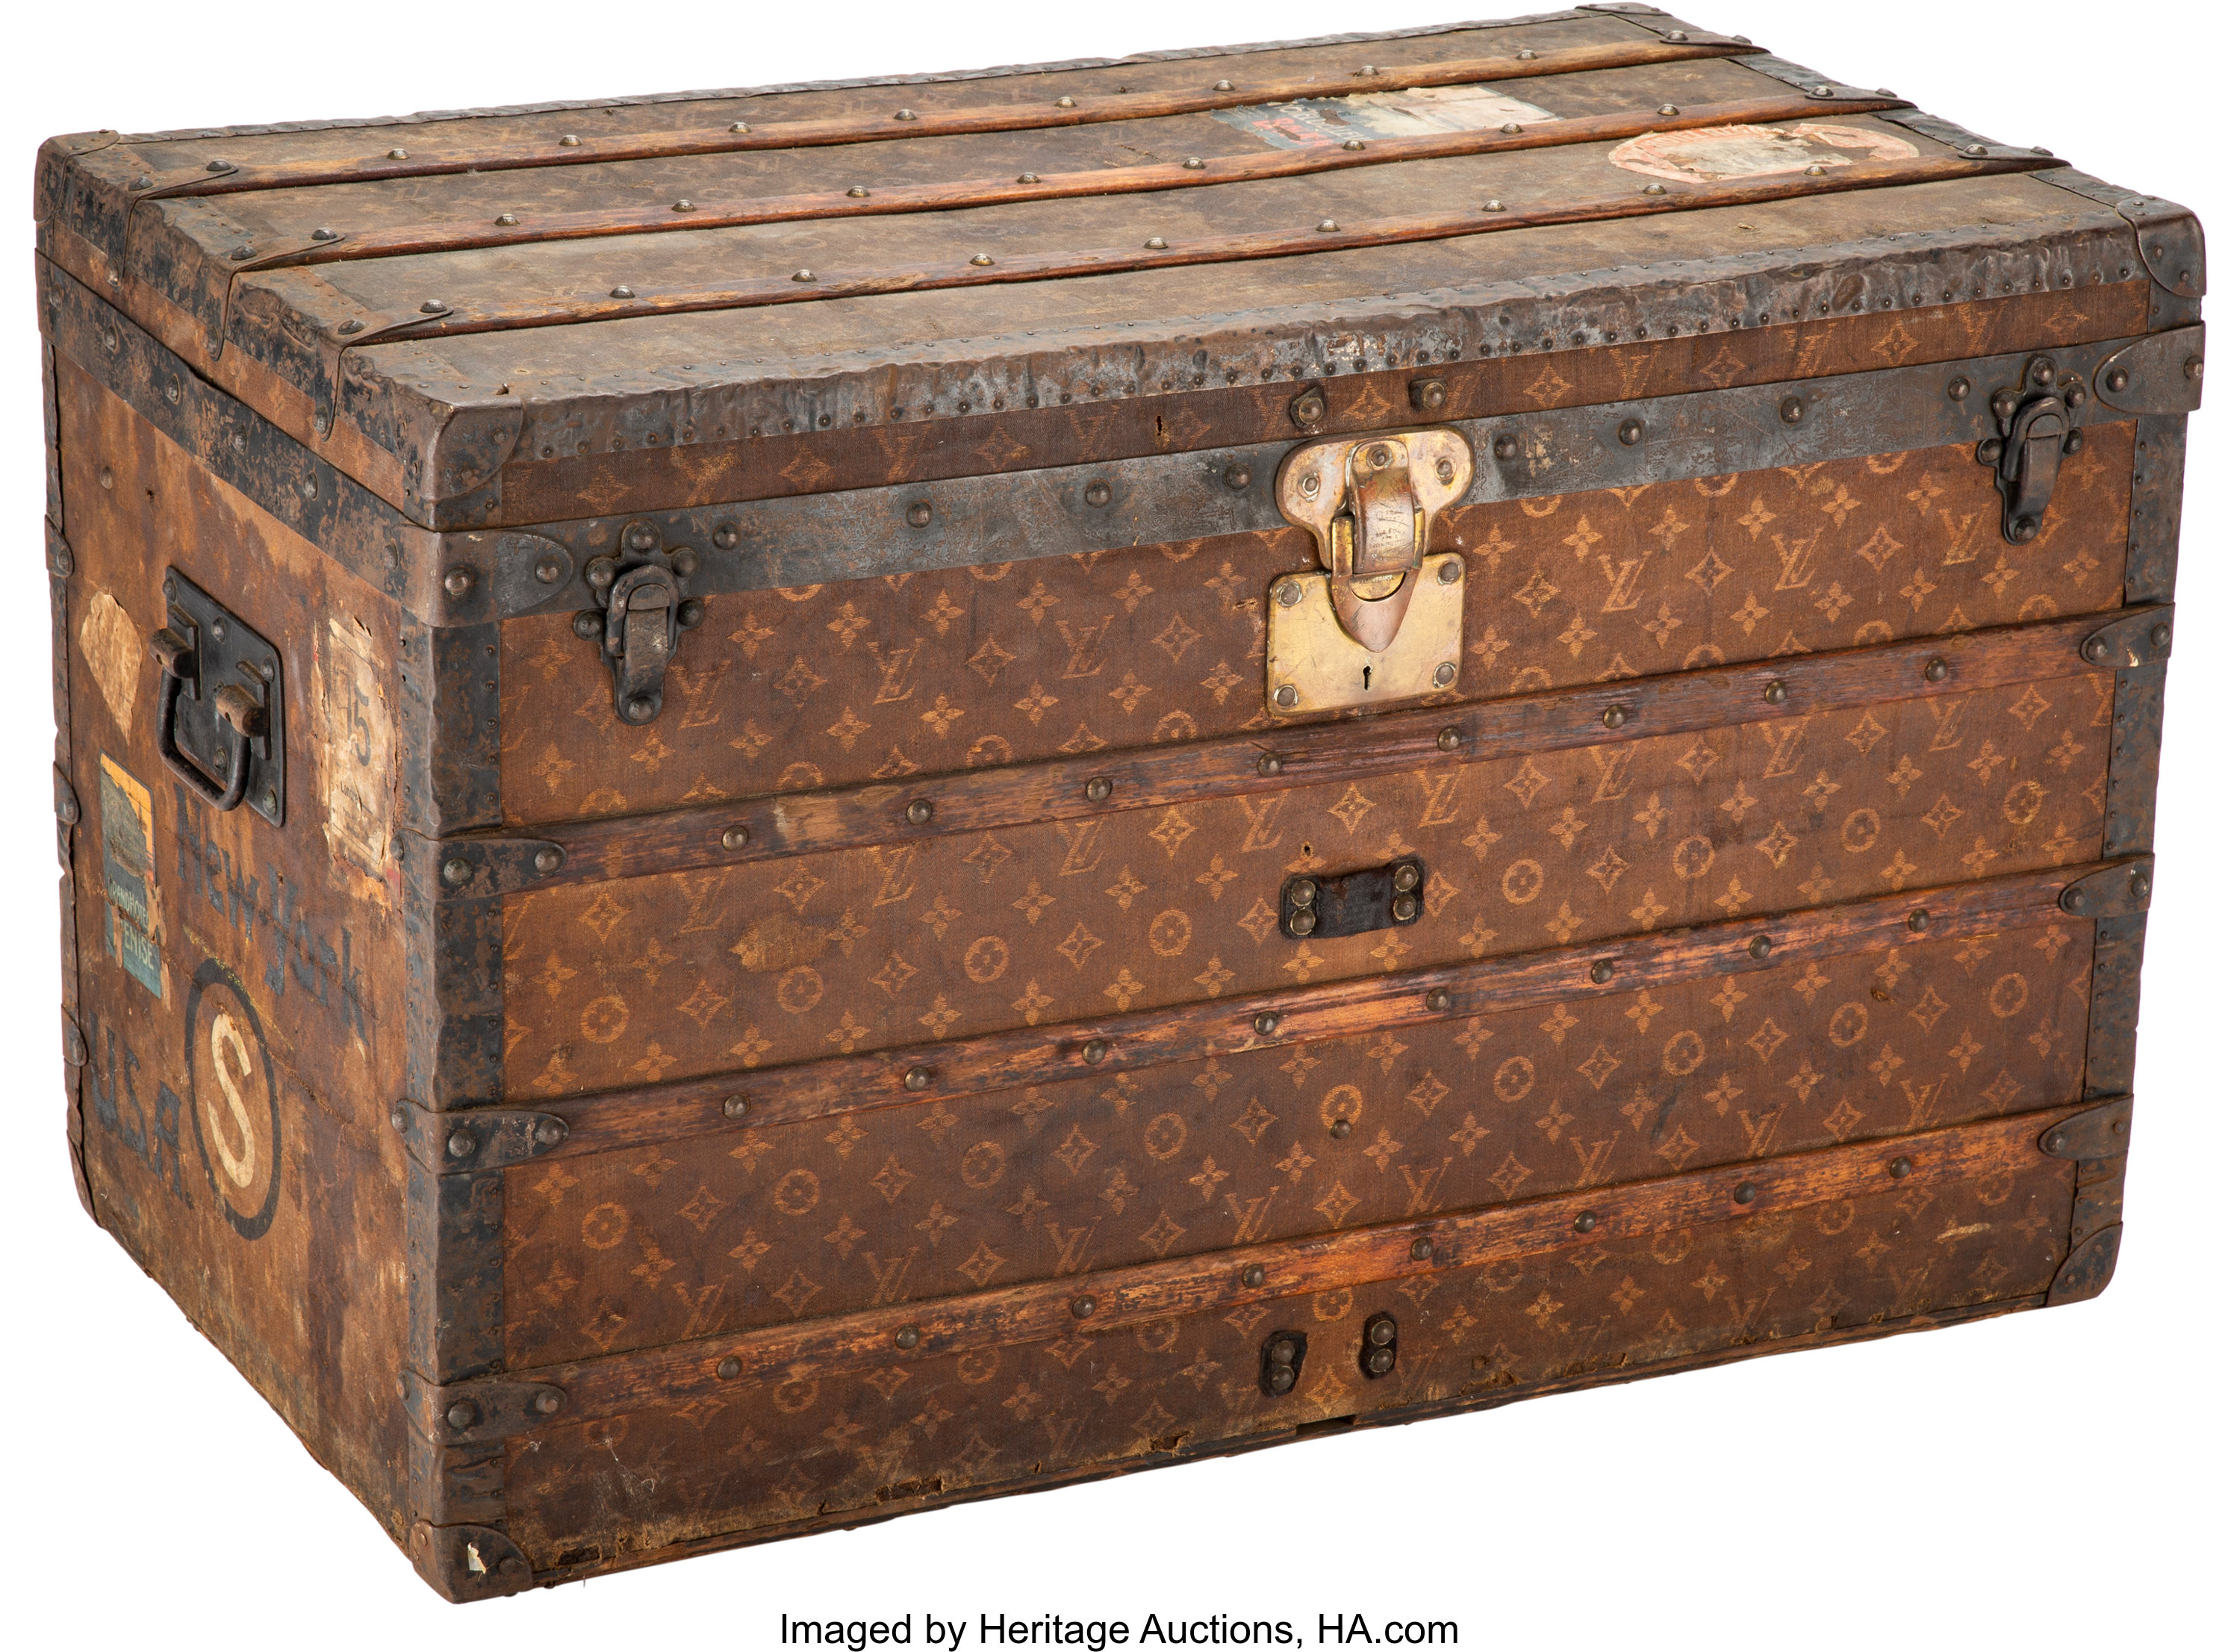 Sold at Auction: A travel trunk by Louis Vuitton, first half 20th century.